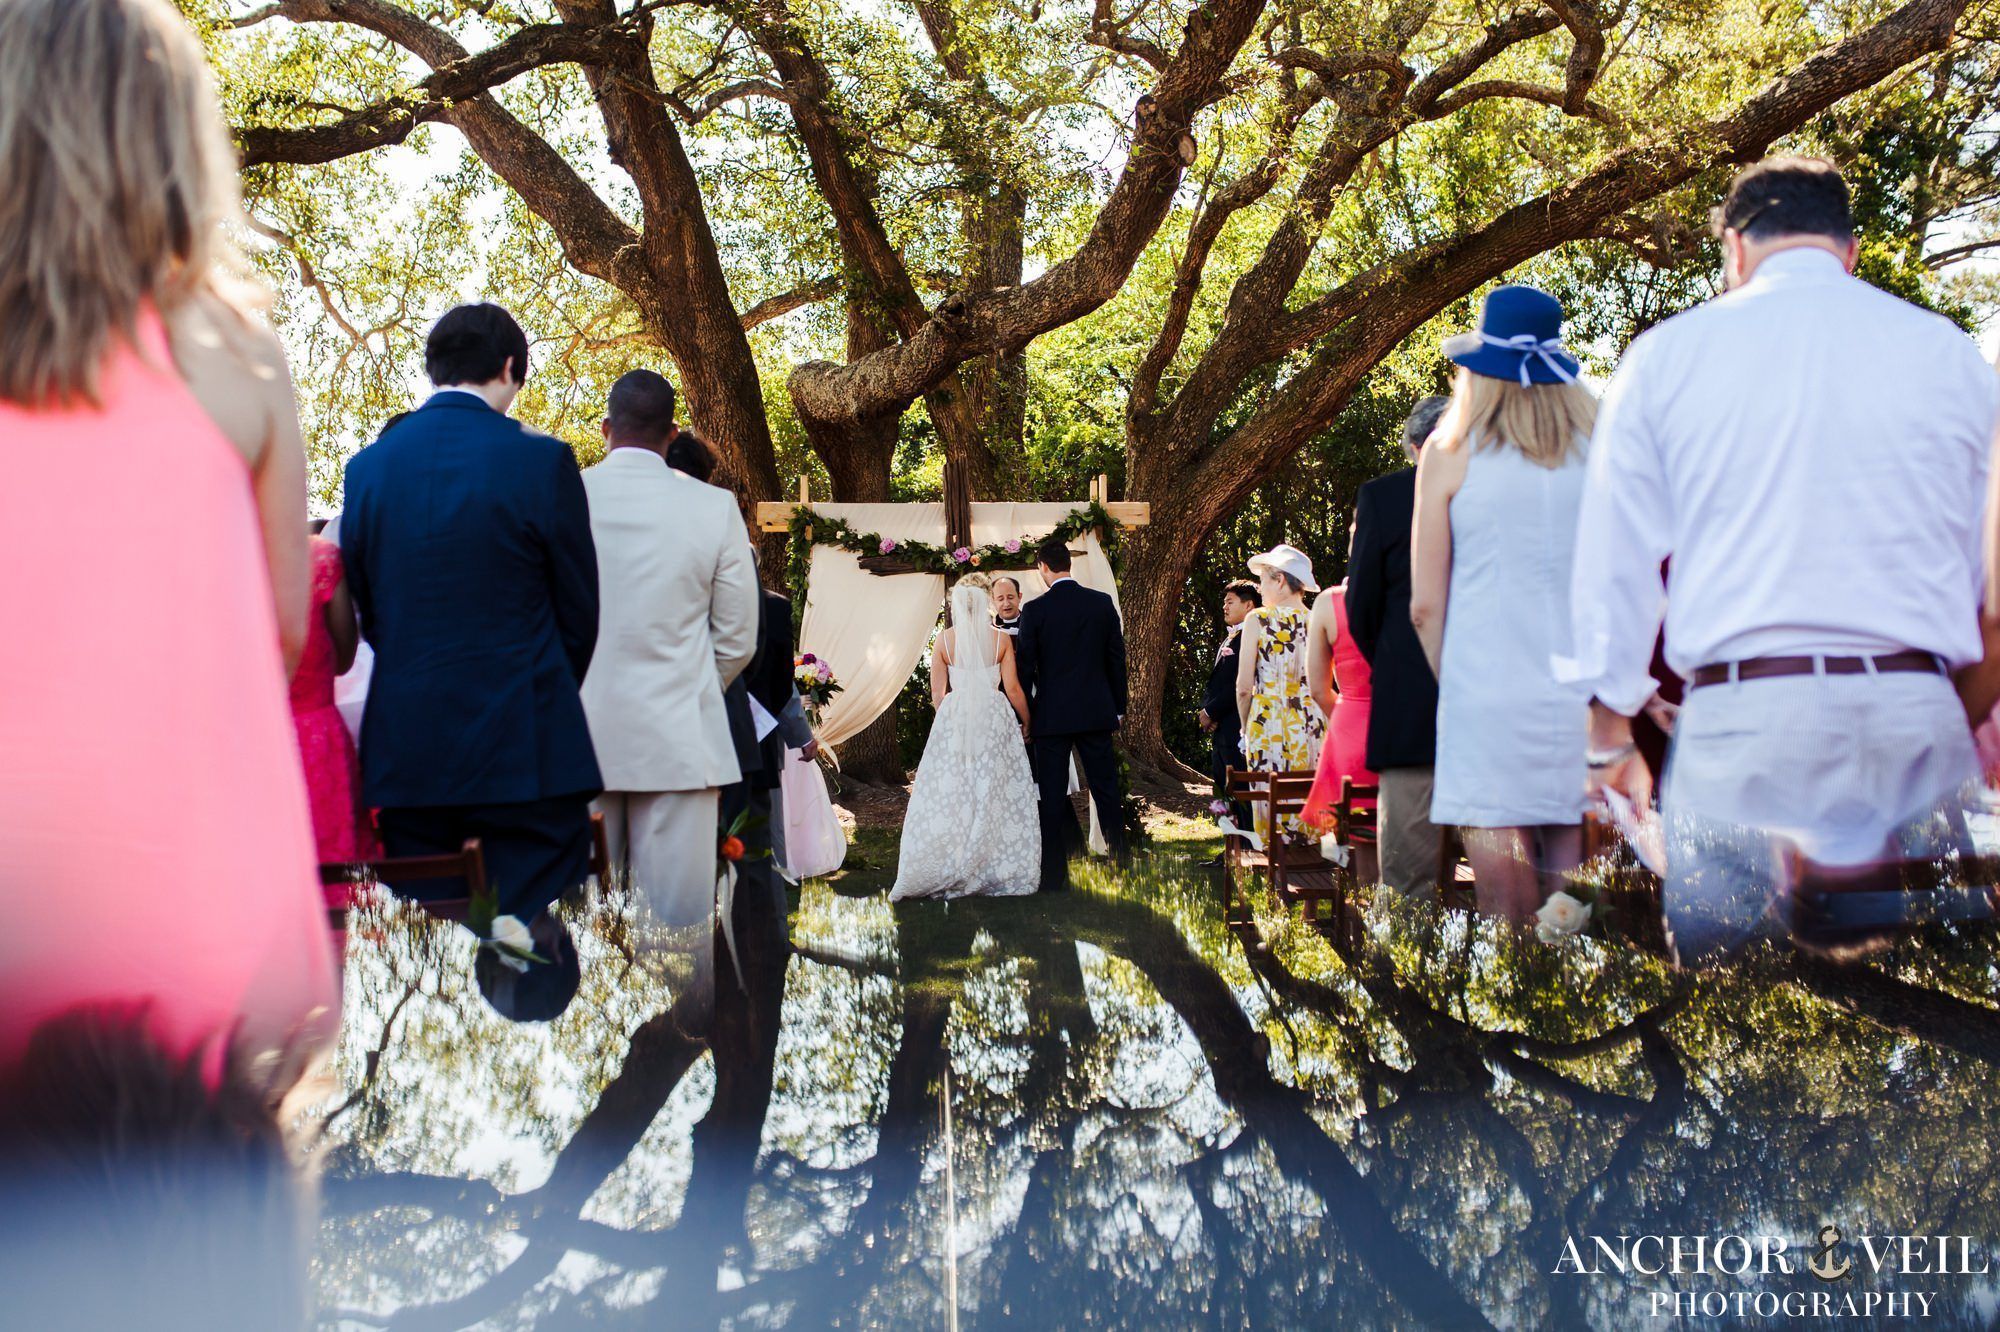 ceremony reflector of the tree